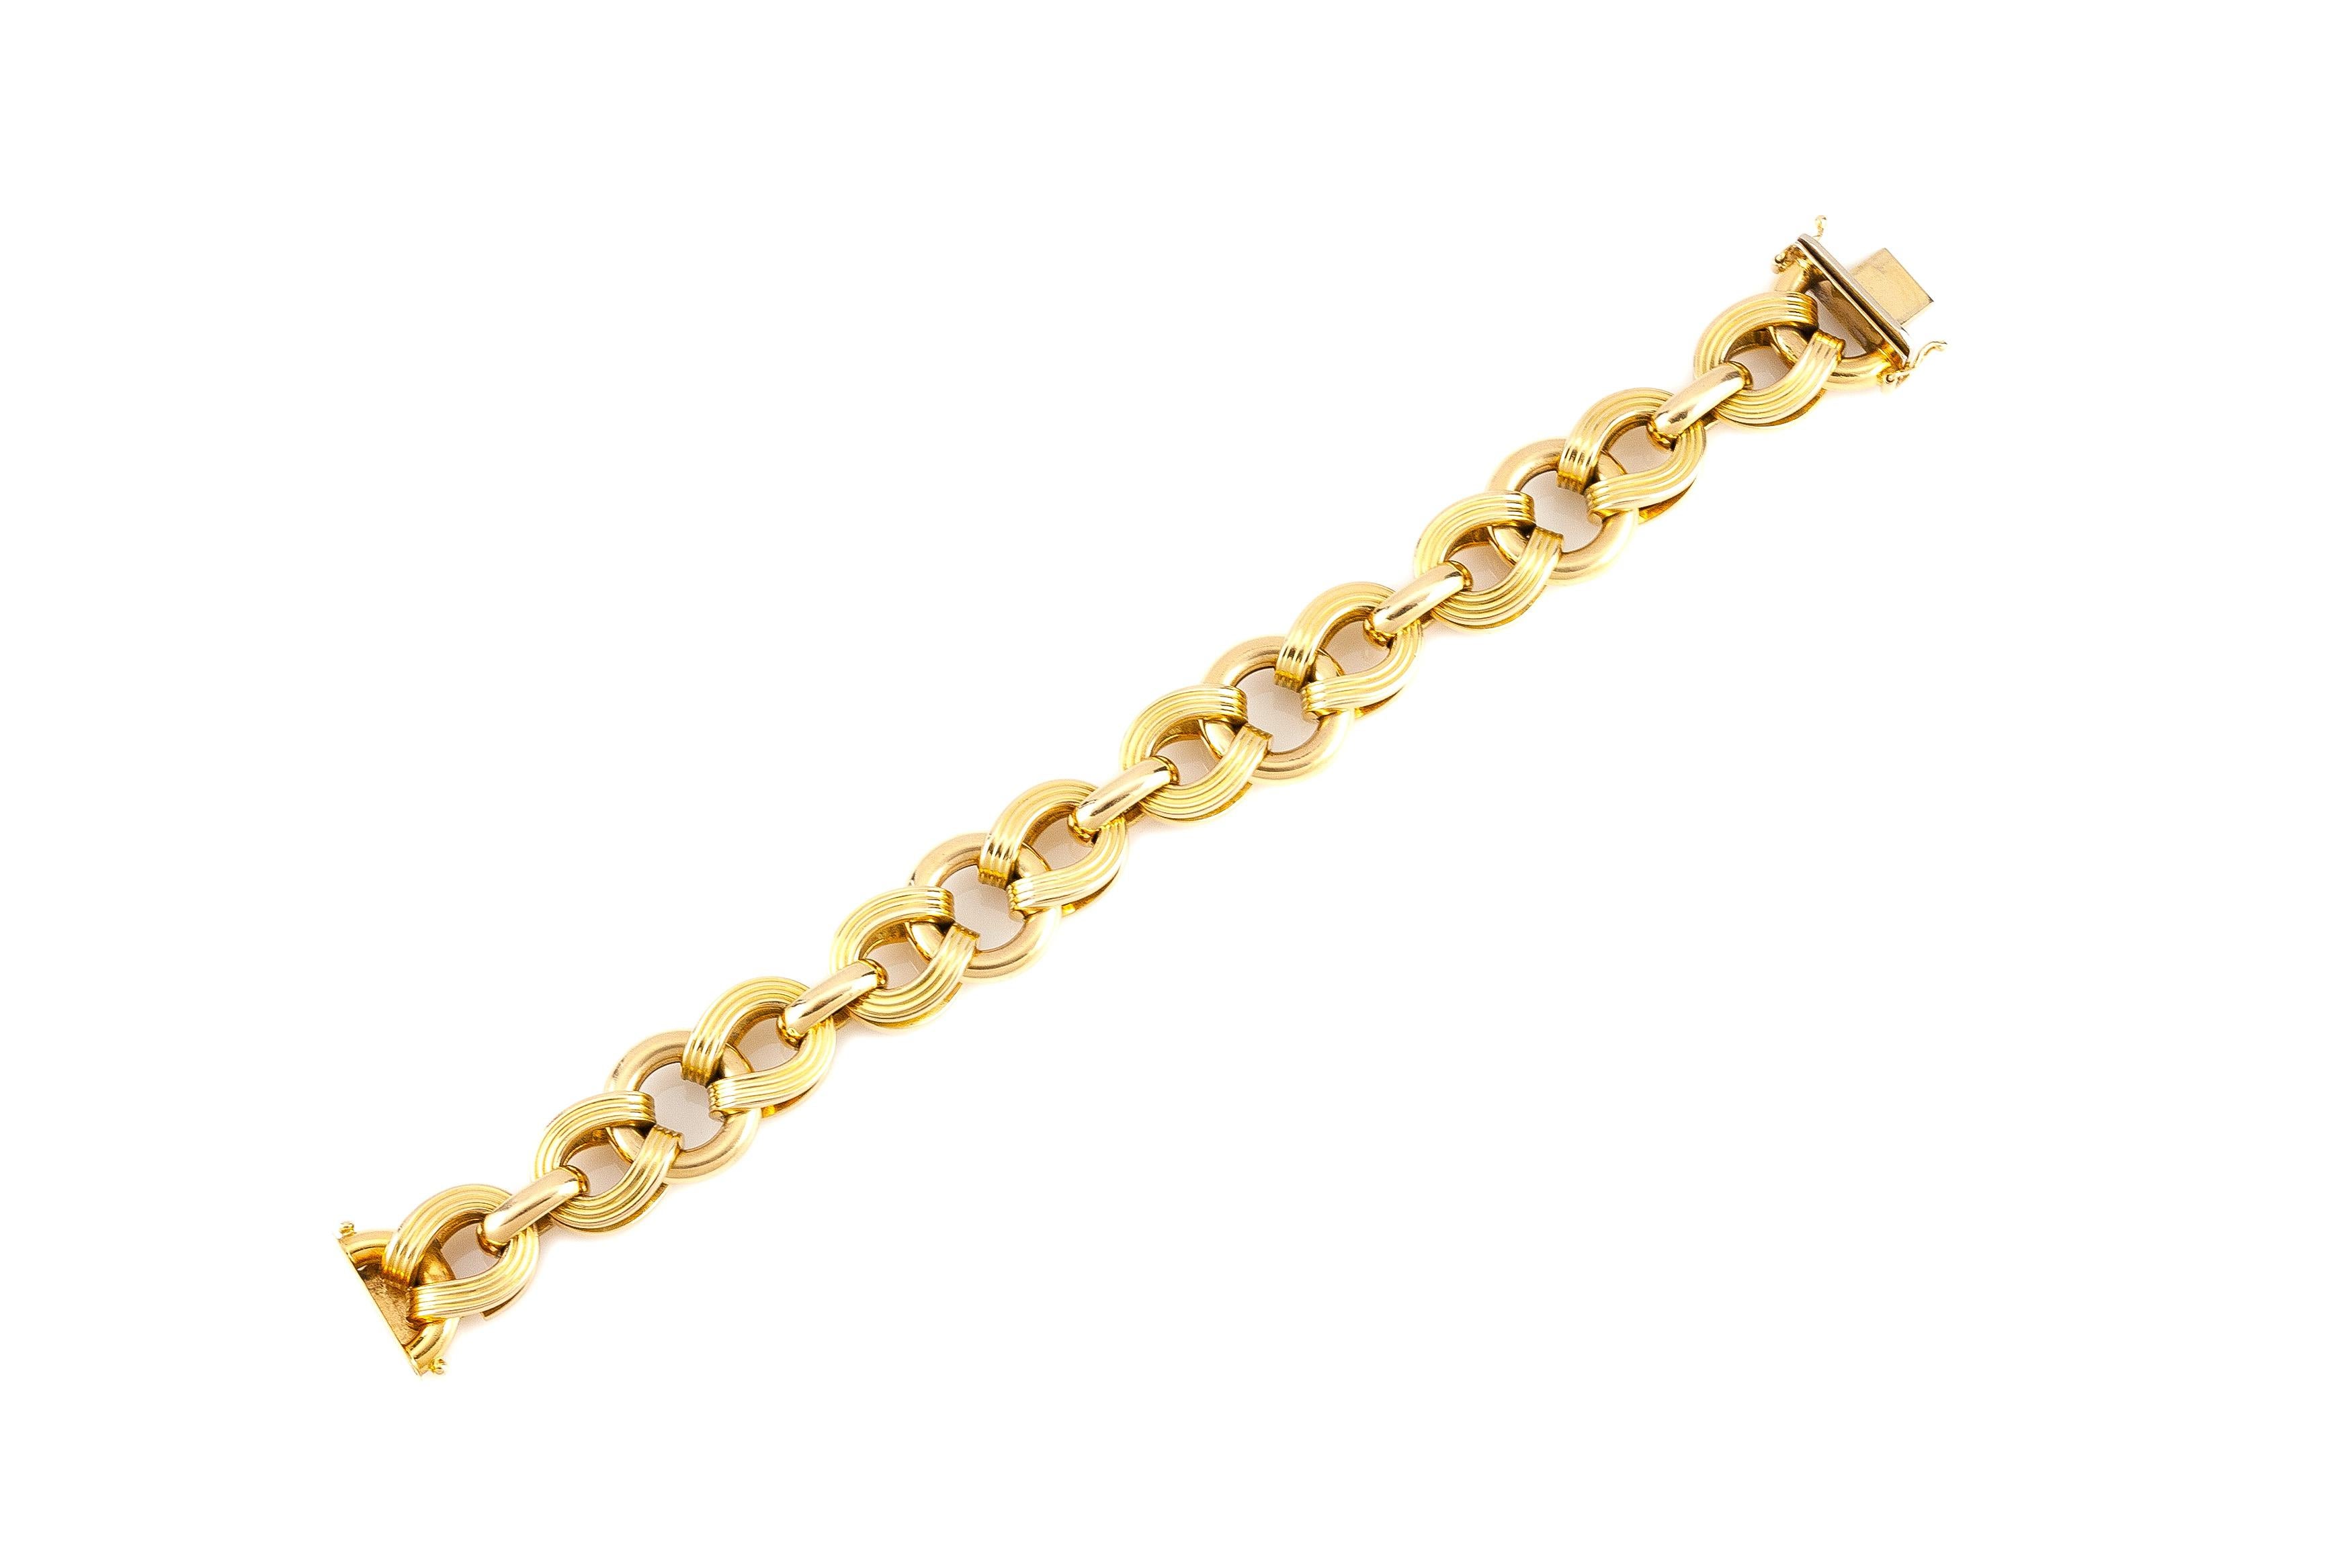 The bracelet is finely crafted in 14k yellow gold and weighing approximately total of 24.40 Dwt.
